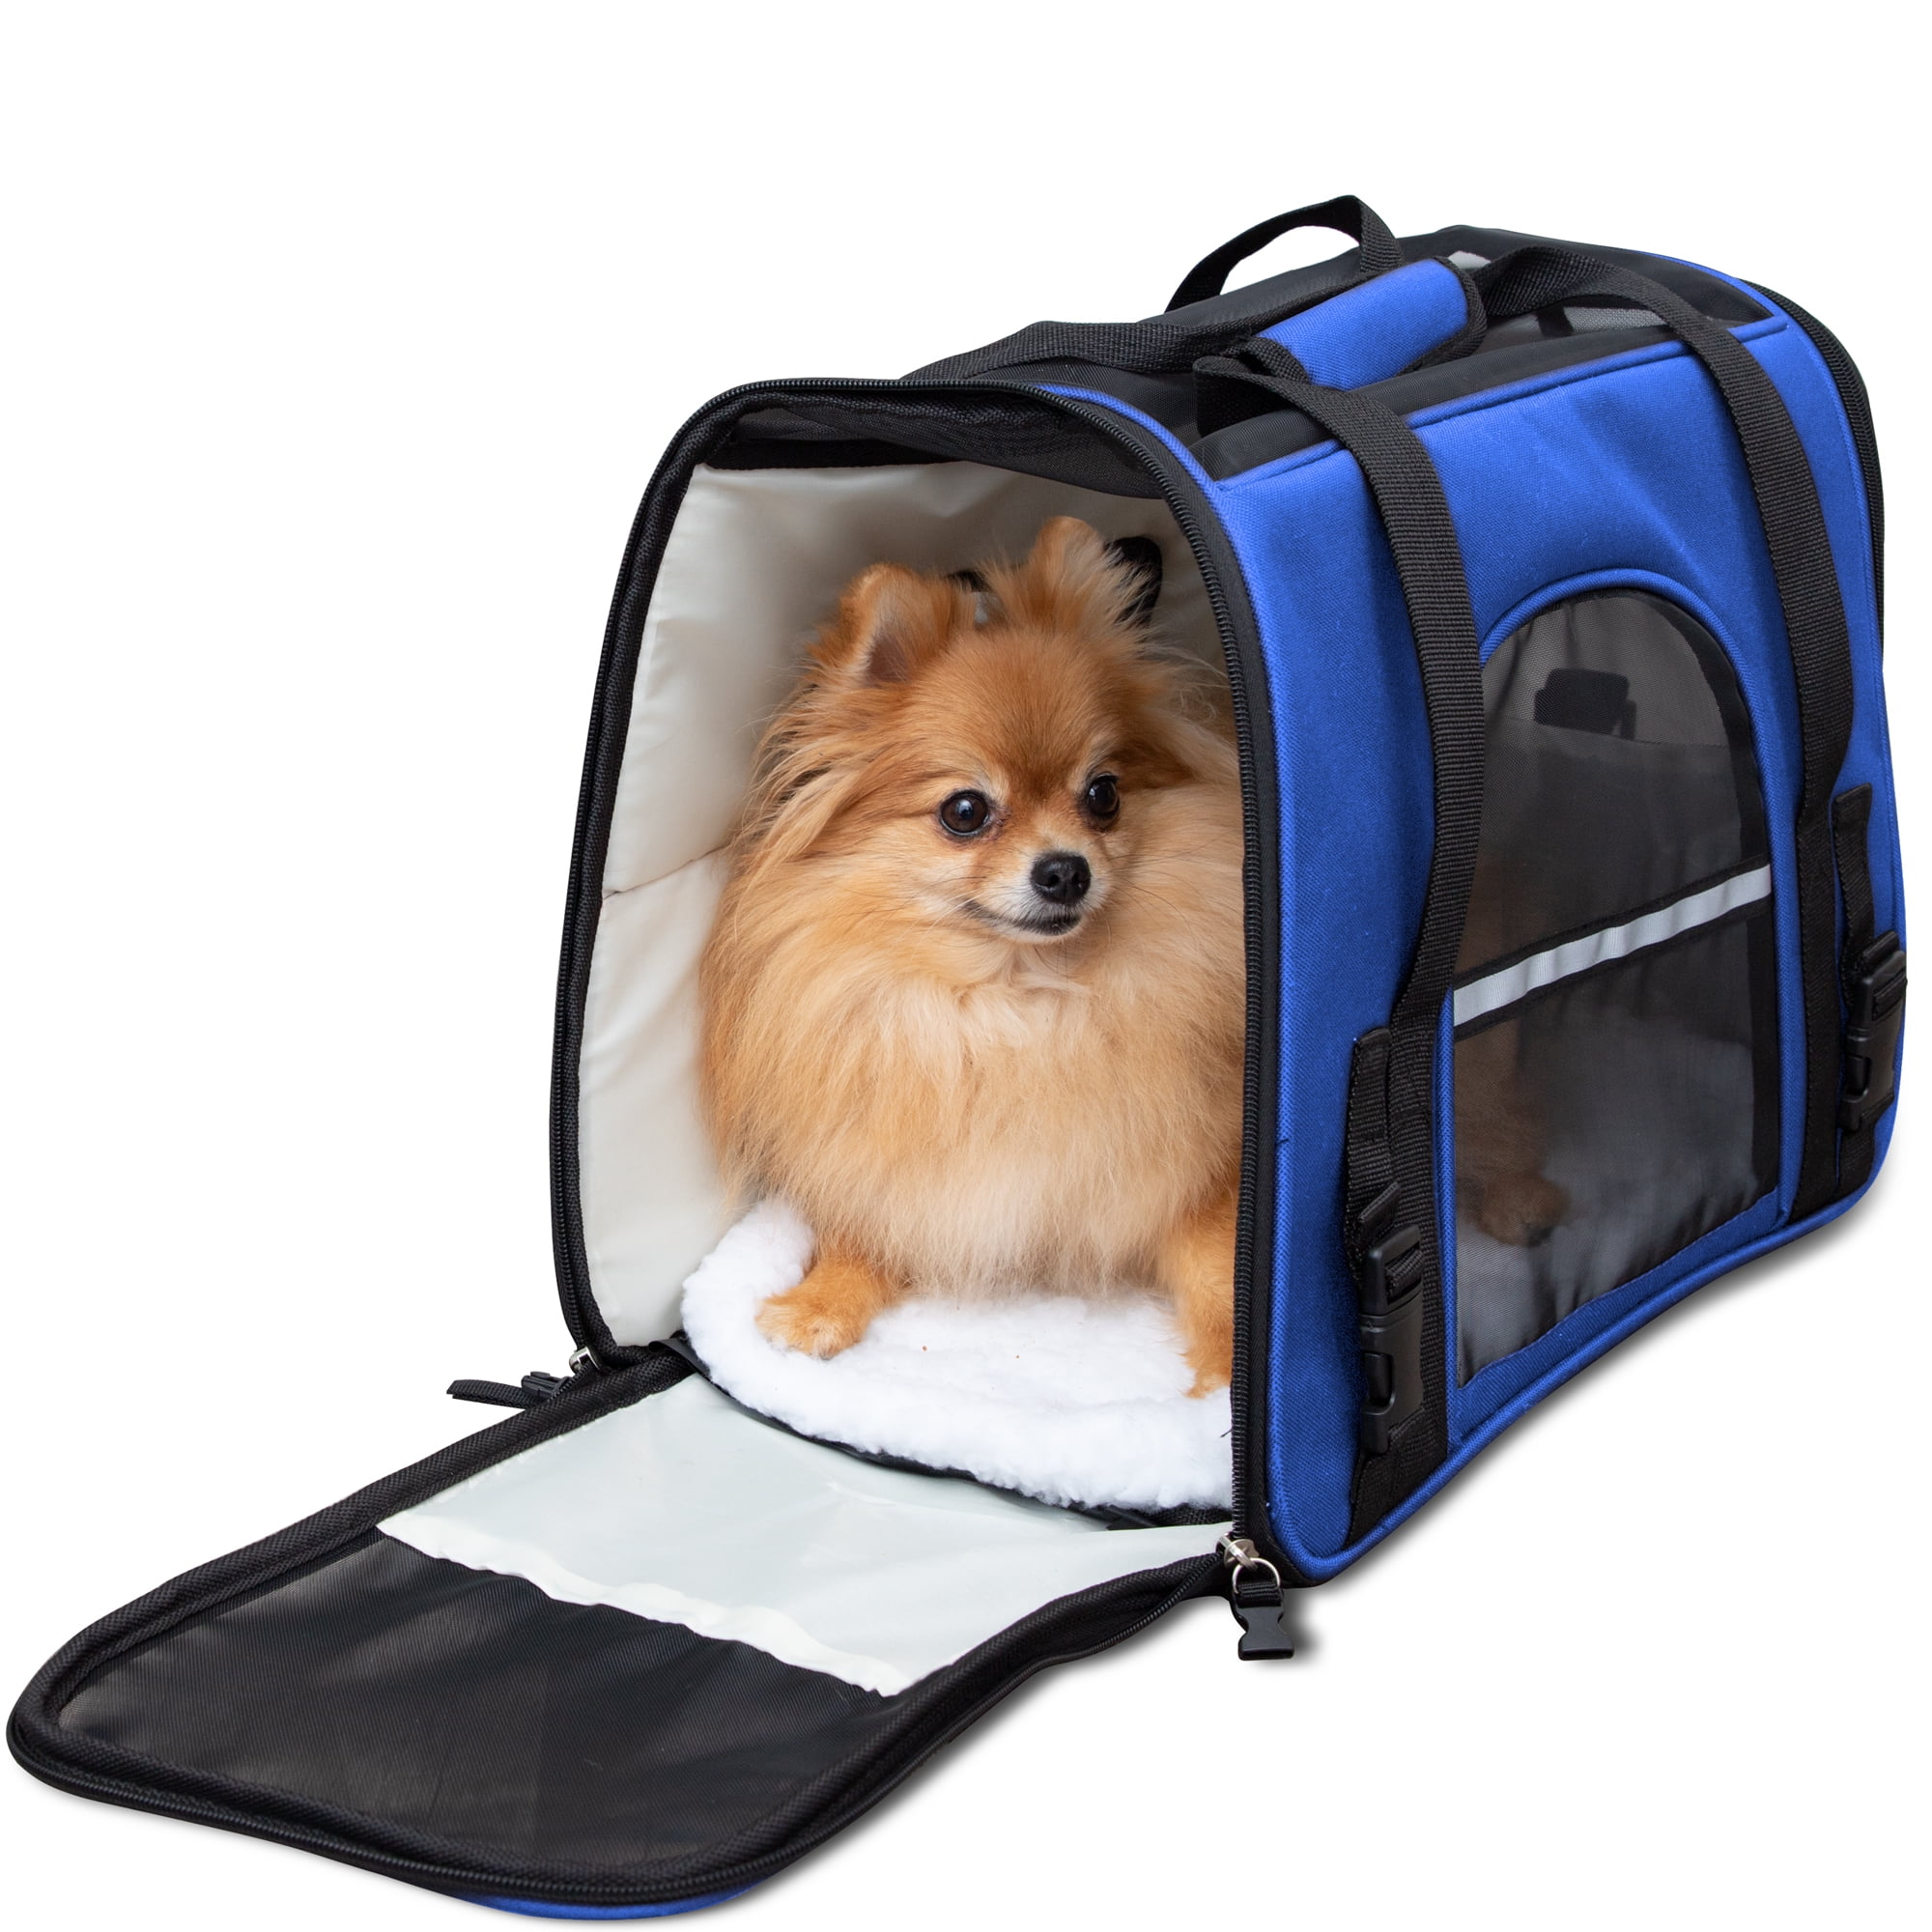 Paws & Pals Soft Sided Pet Carrier, FAA Airline Approved, Blue 